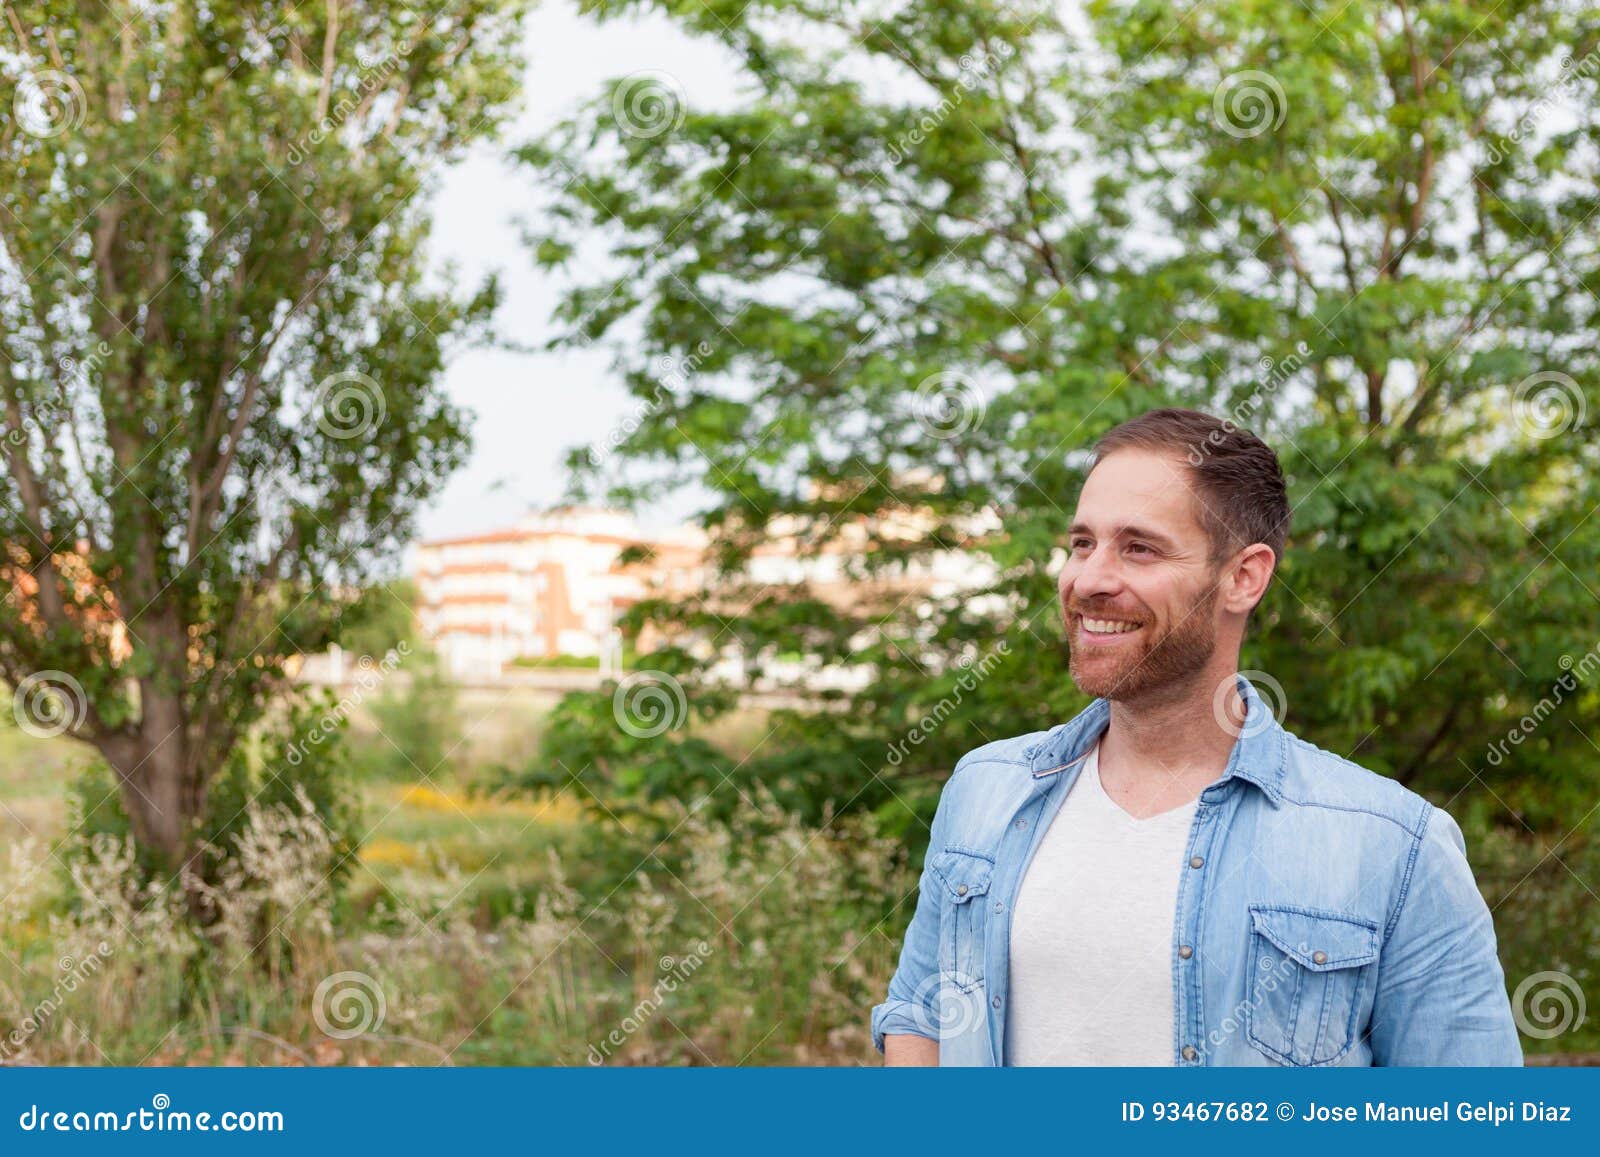 Portrait of a casual men in a park. Portrait of a casual man with denim shirt in a park